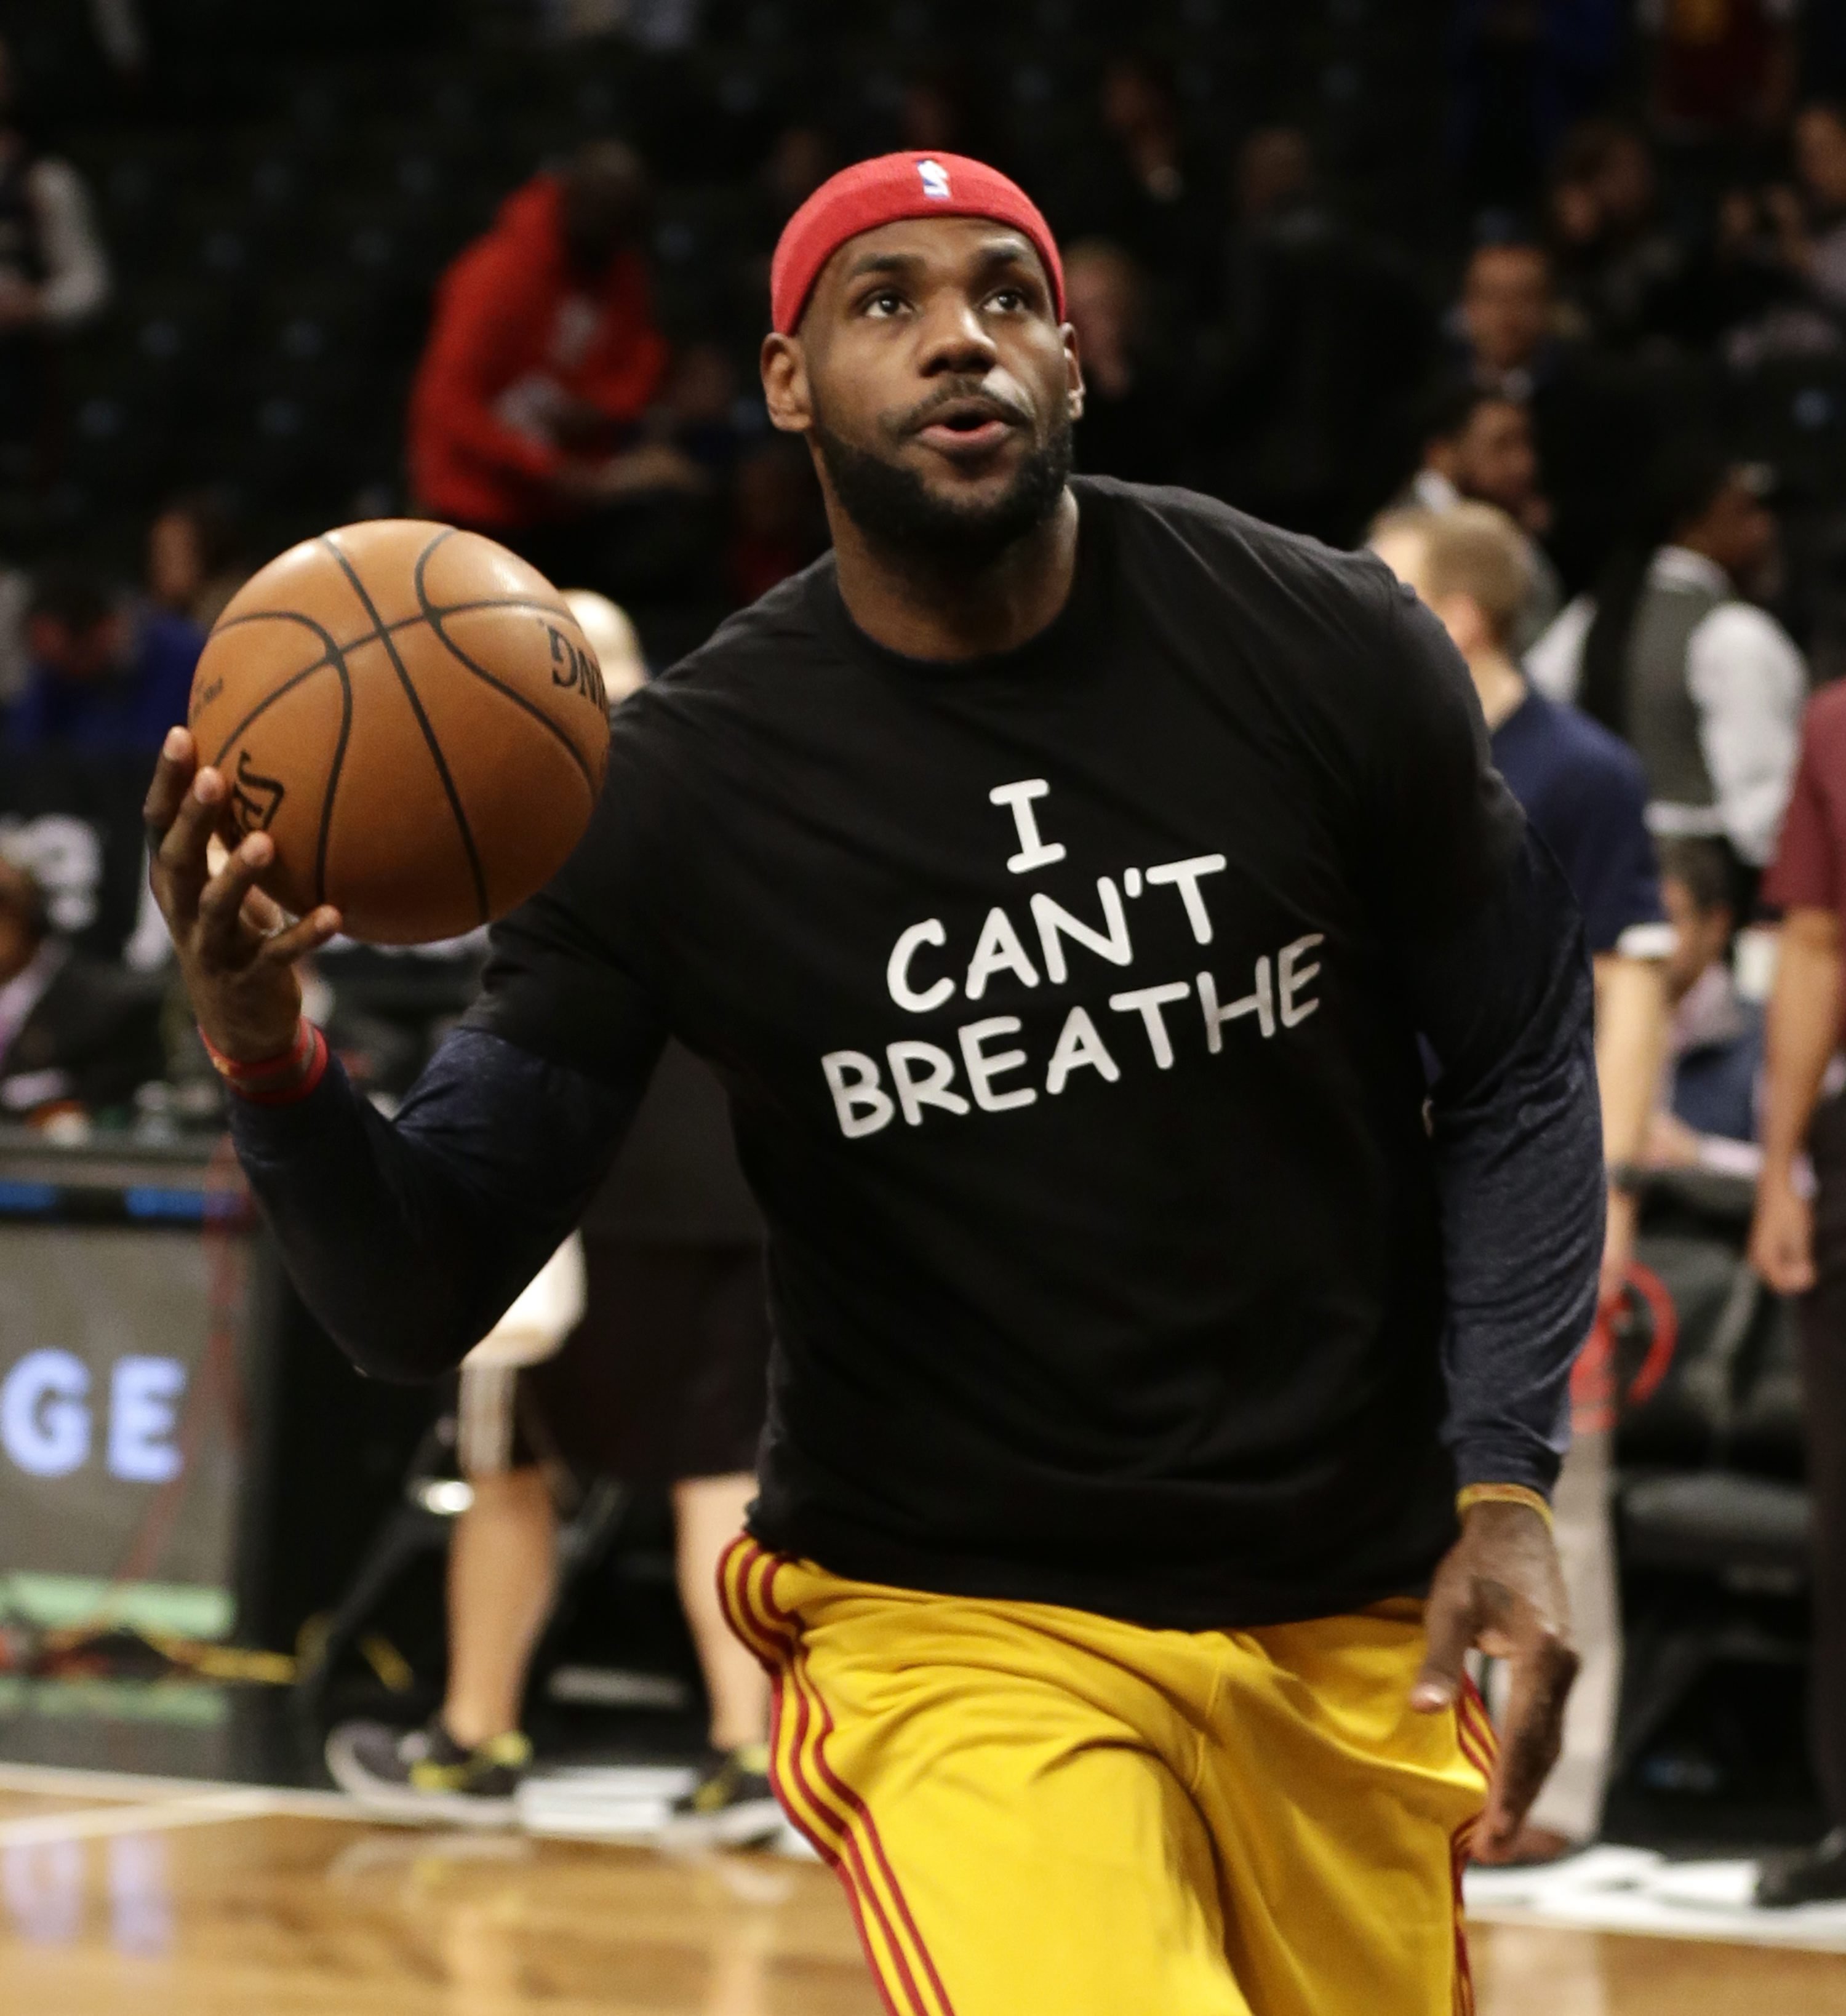 Cleveland Cavaliers forward LeBron James warms up before an NBA basketball game against the Brooklyn Nets at the Barclays Center on Dec. 8, 2014, in New York.